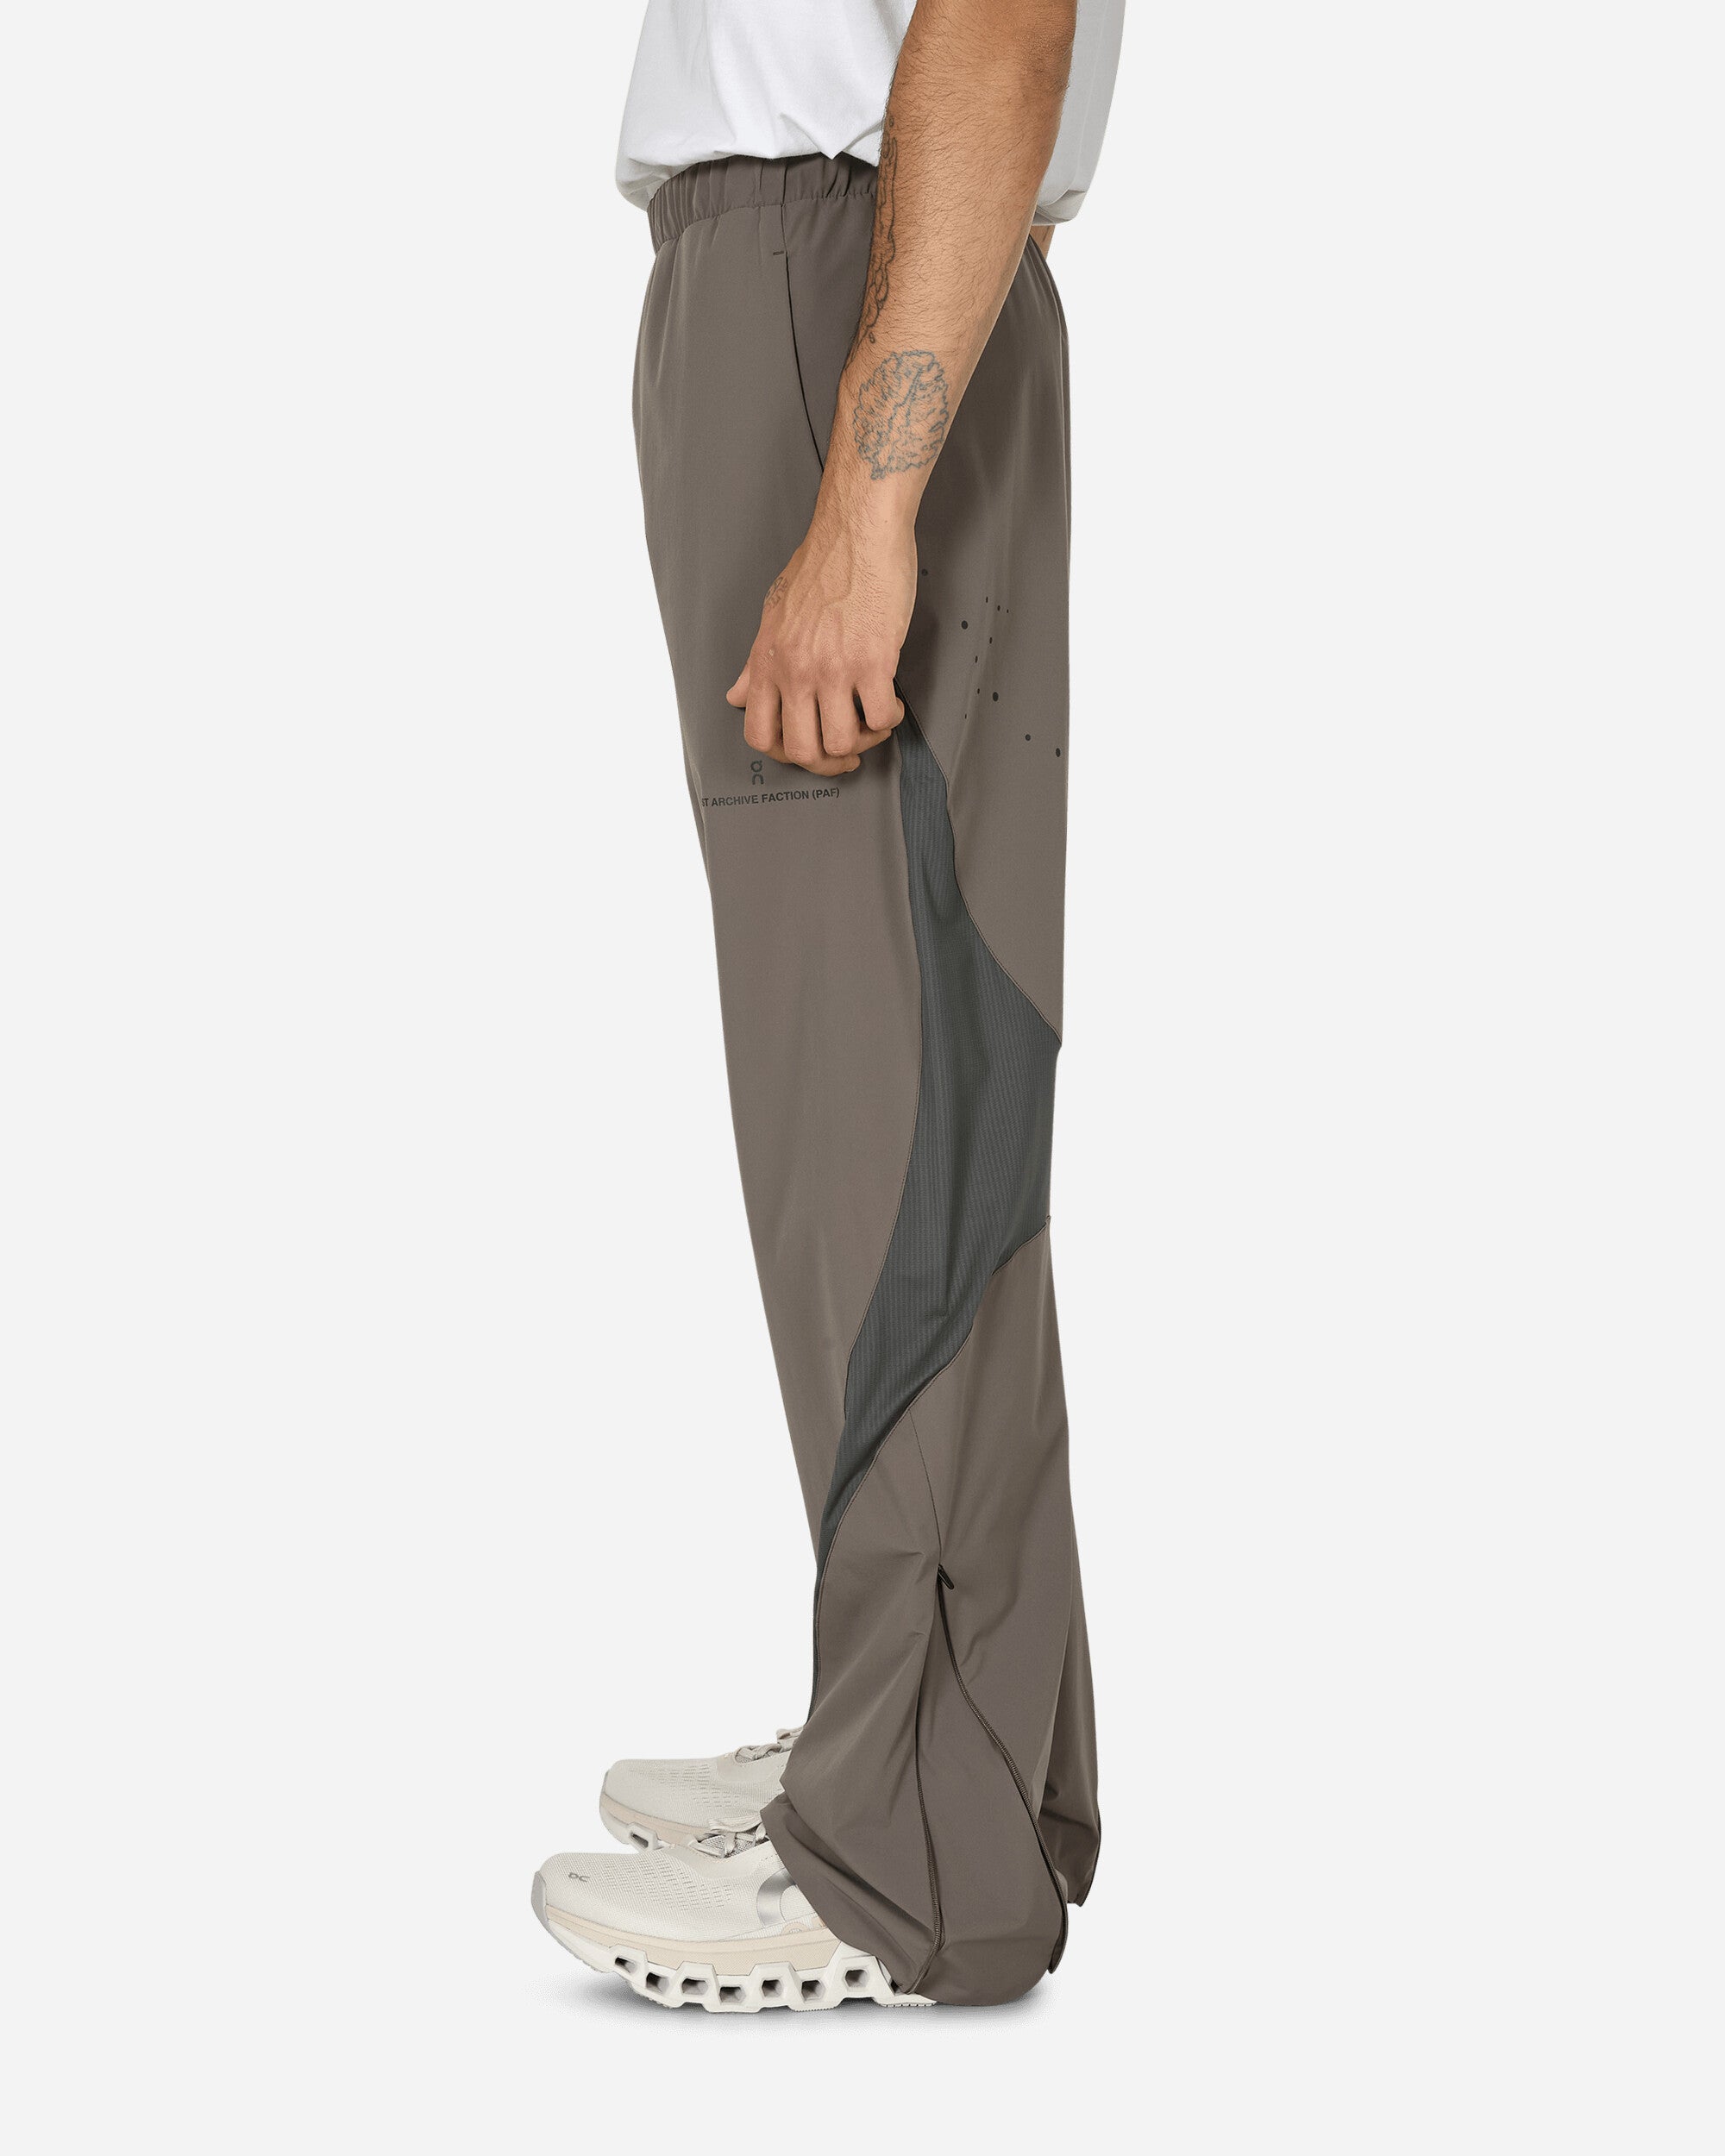 On Running Pants Paf Eclipse/Shadow Pants Casual 1UE10091953 001